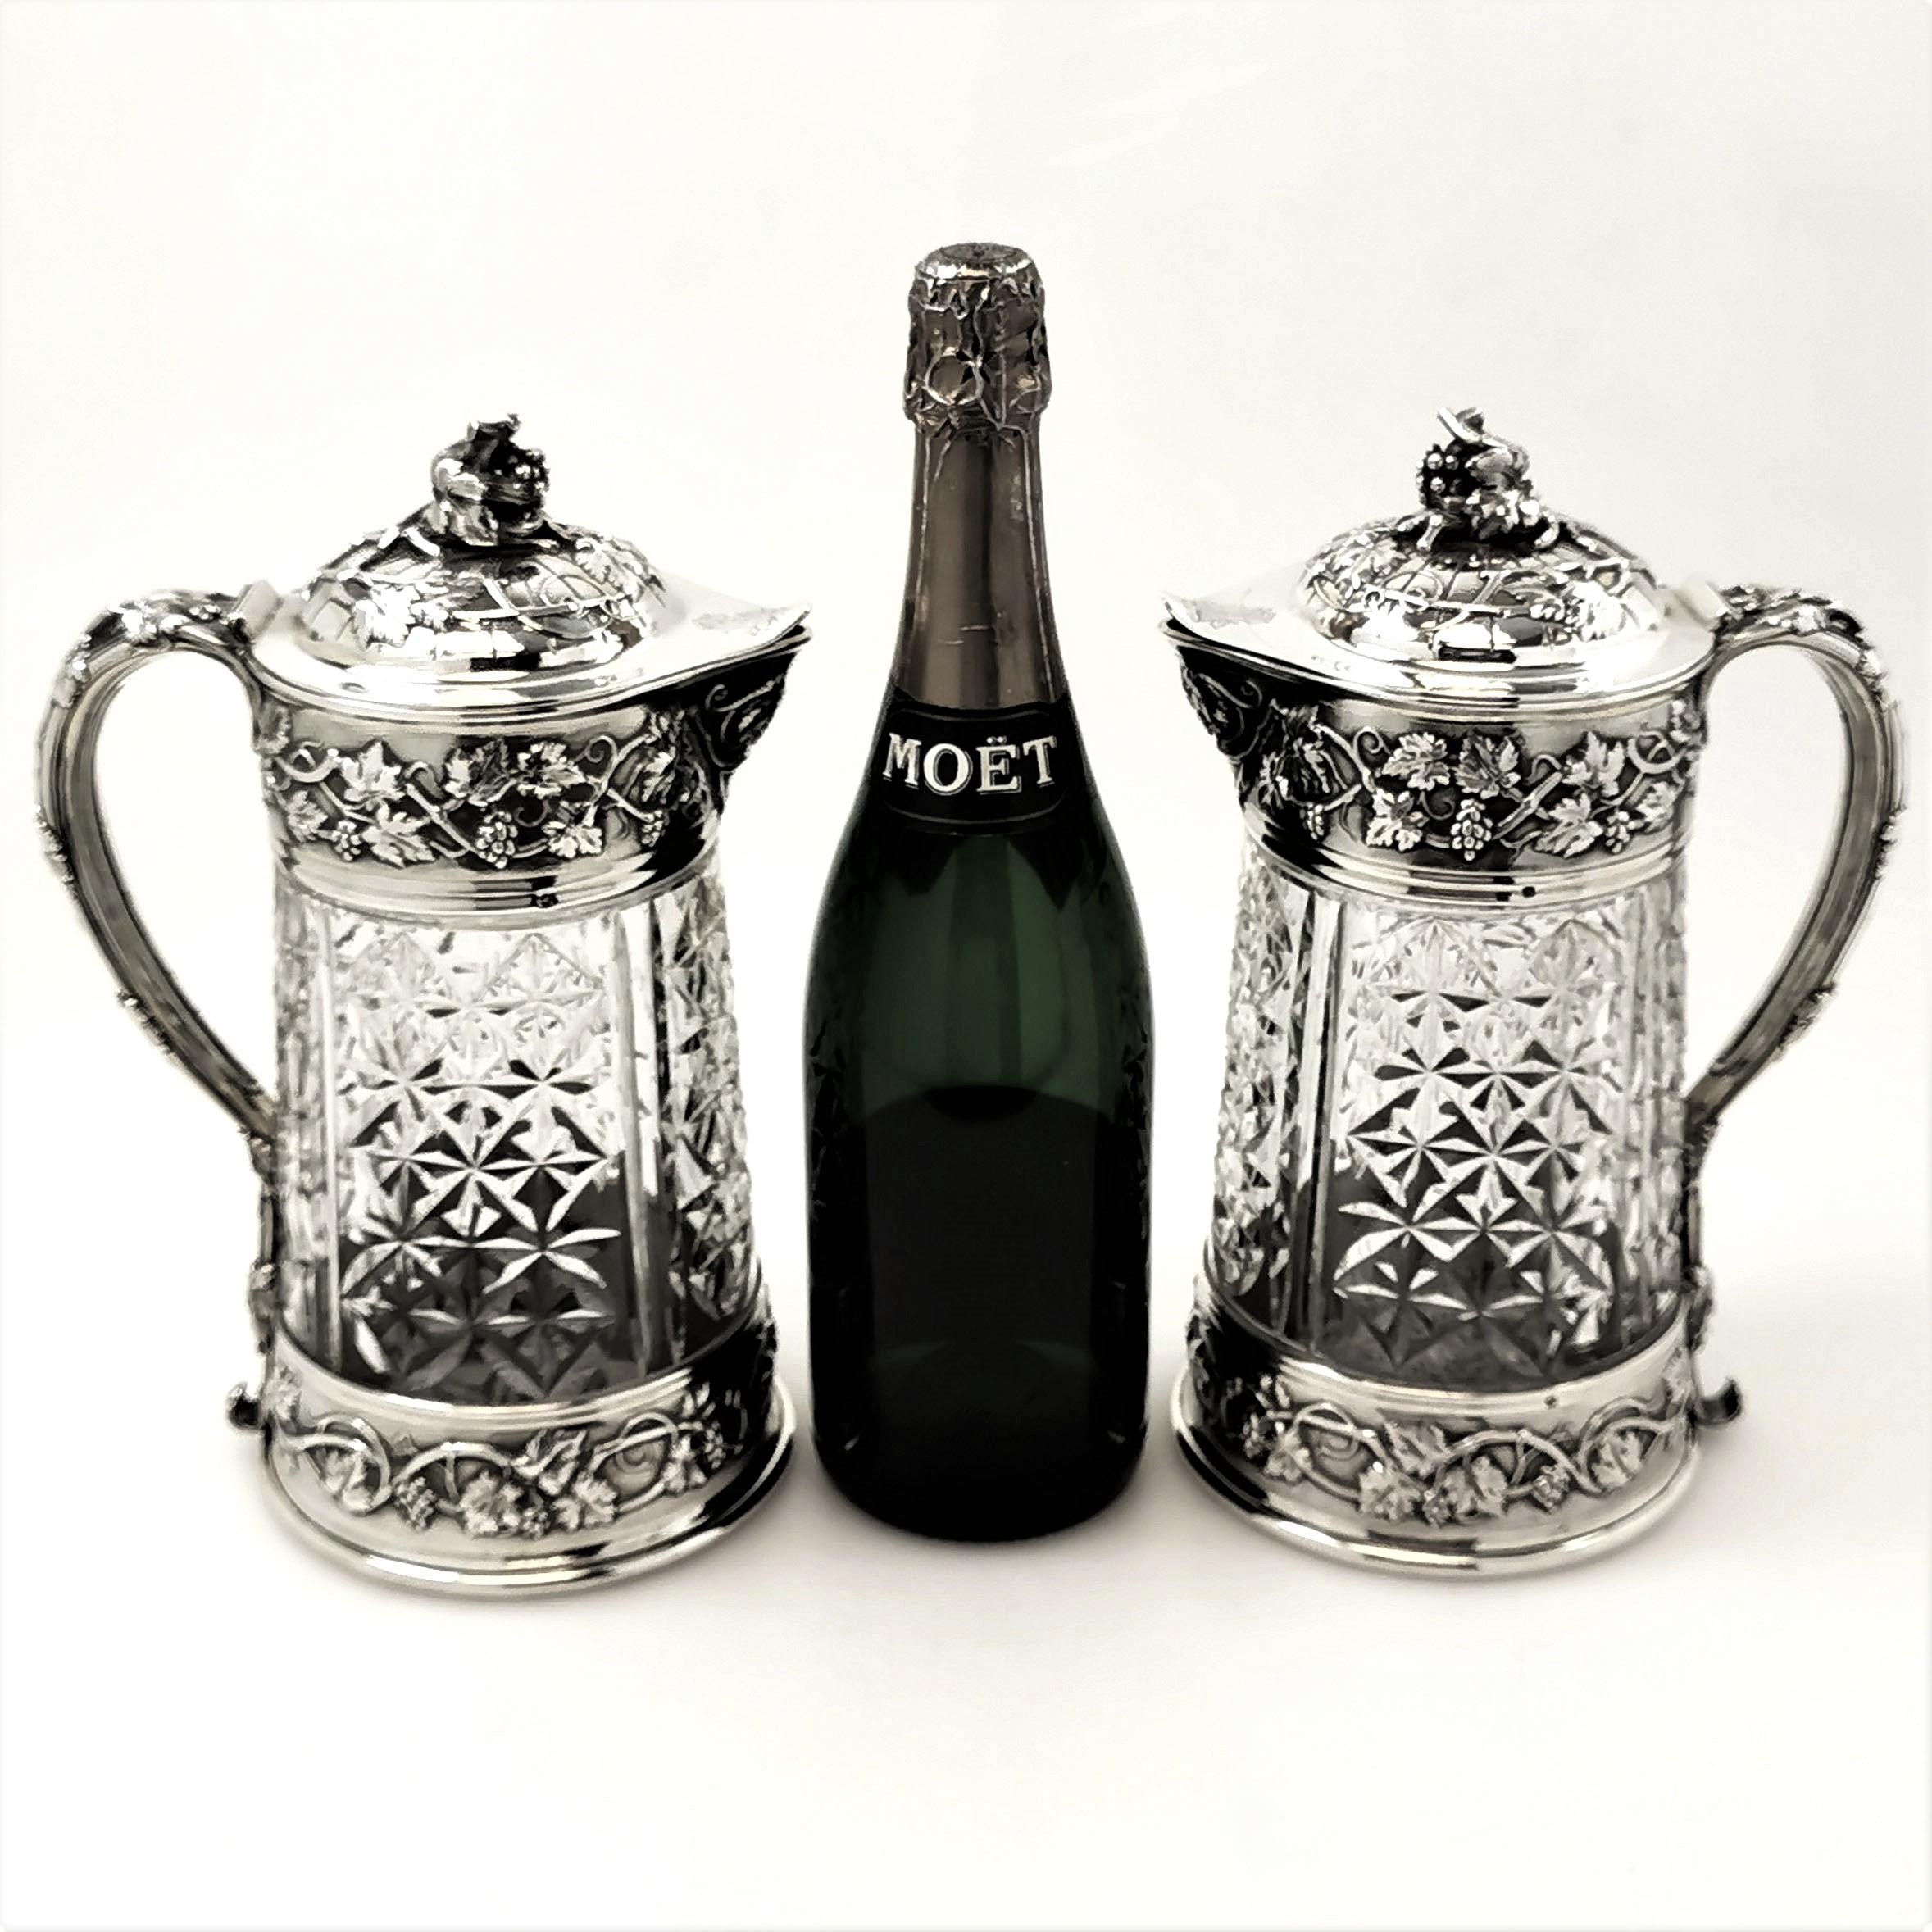 19th Century Pair of Antique French Silver and Glass Claret Jugs / Wine Decanters Odiot c1870